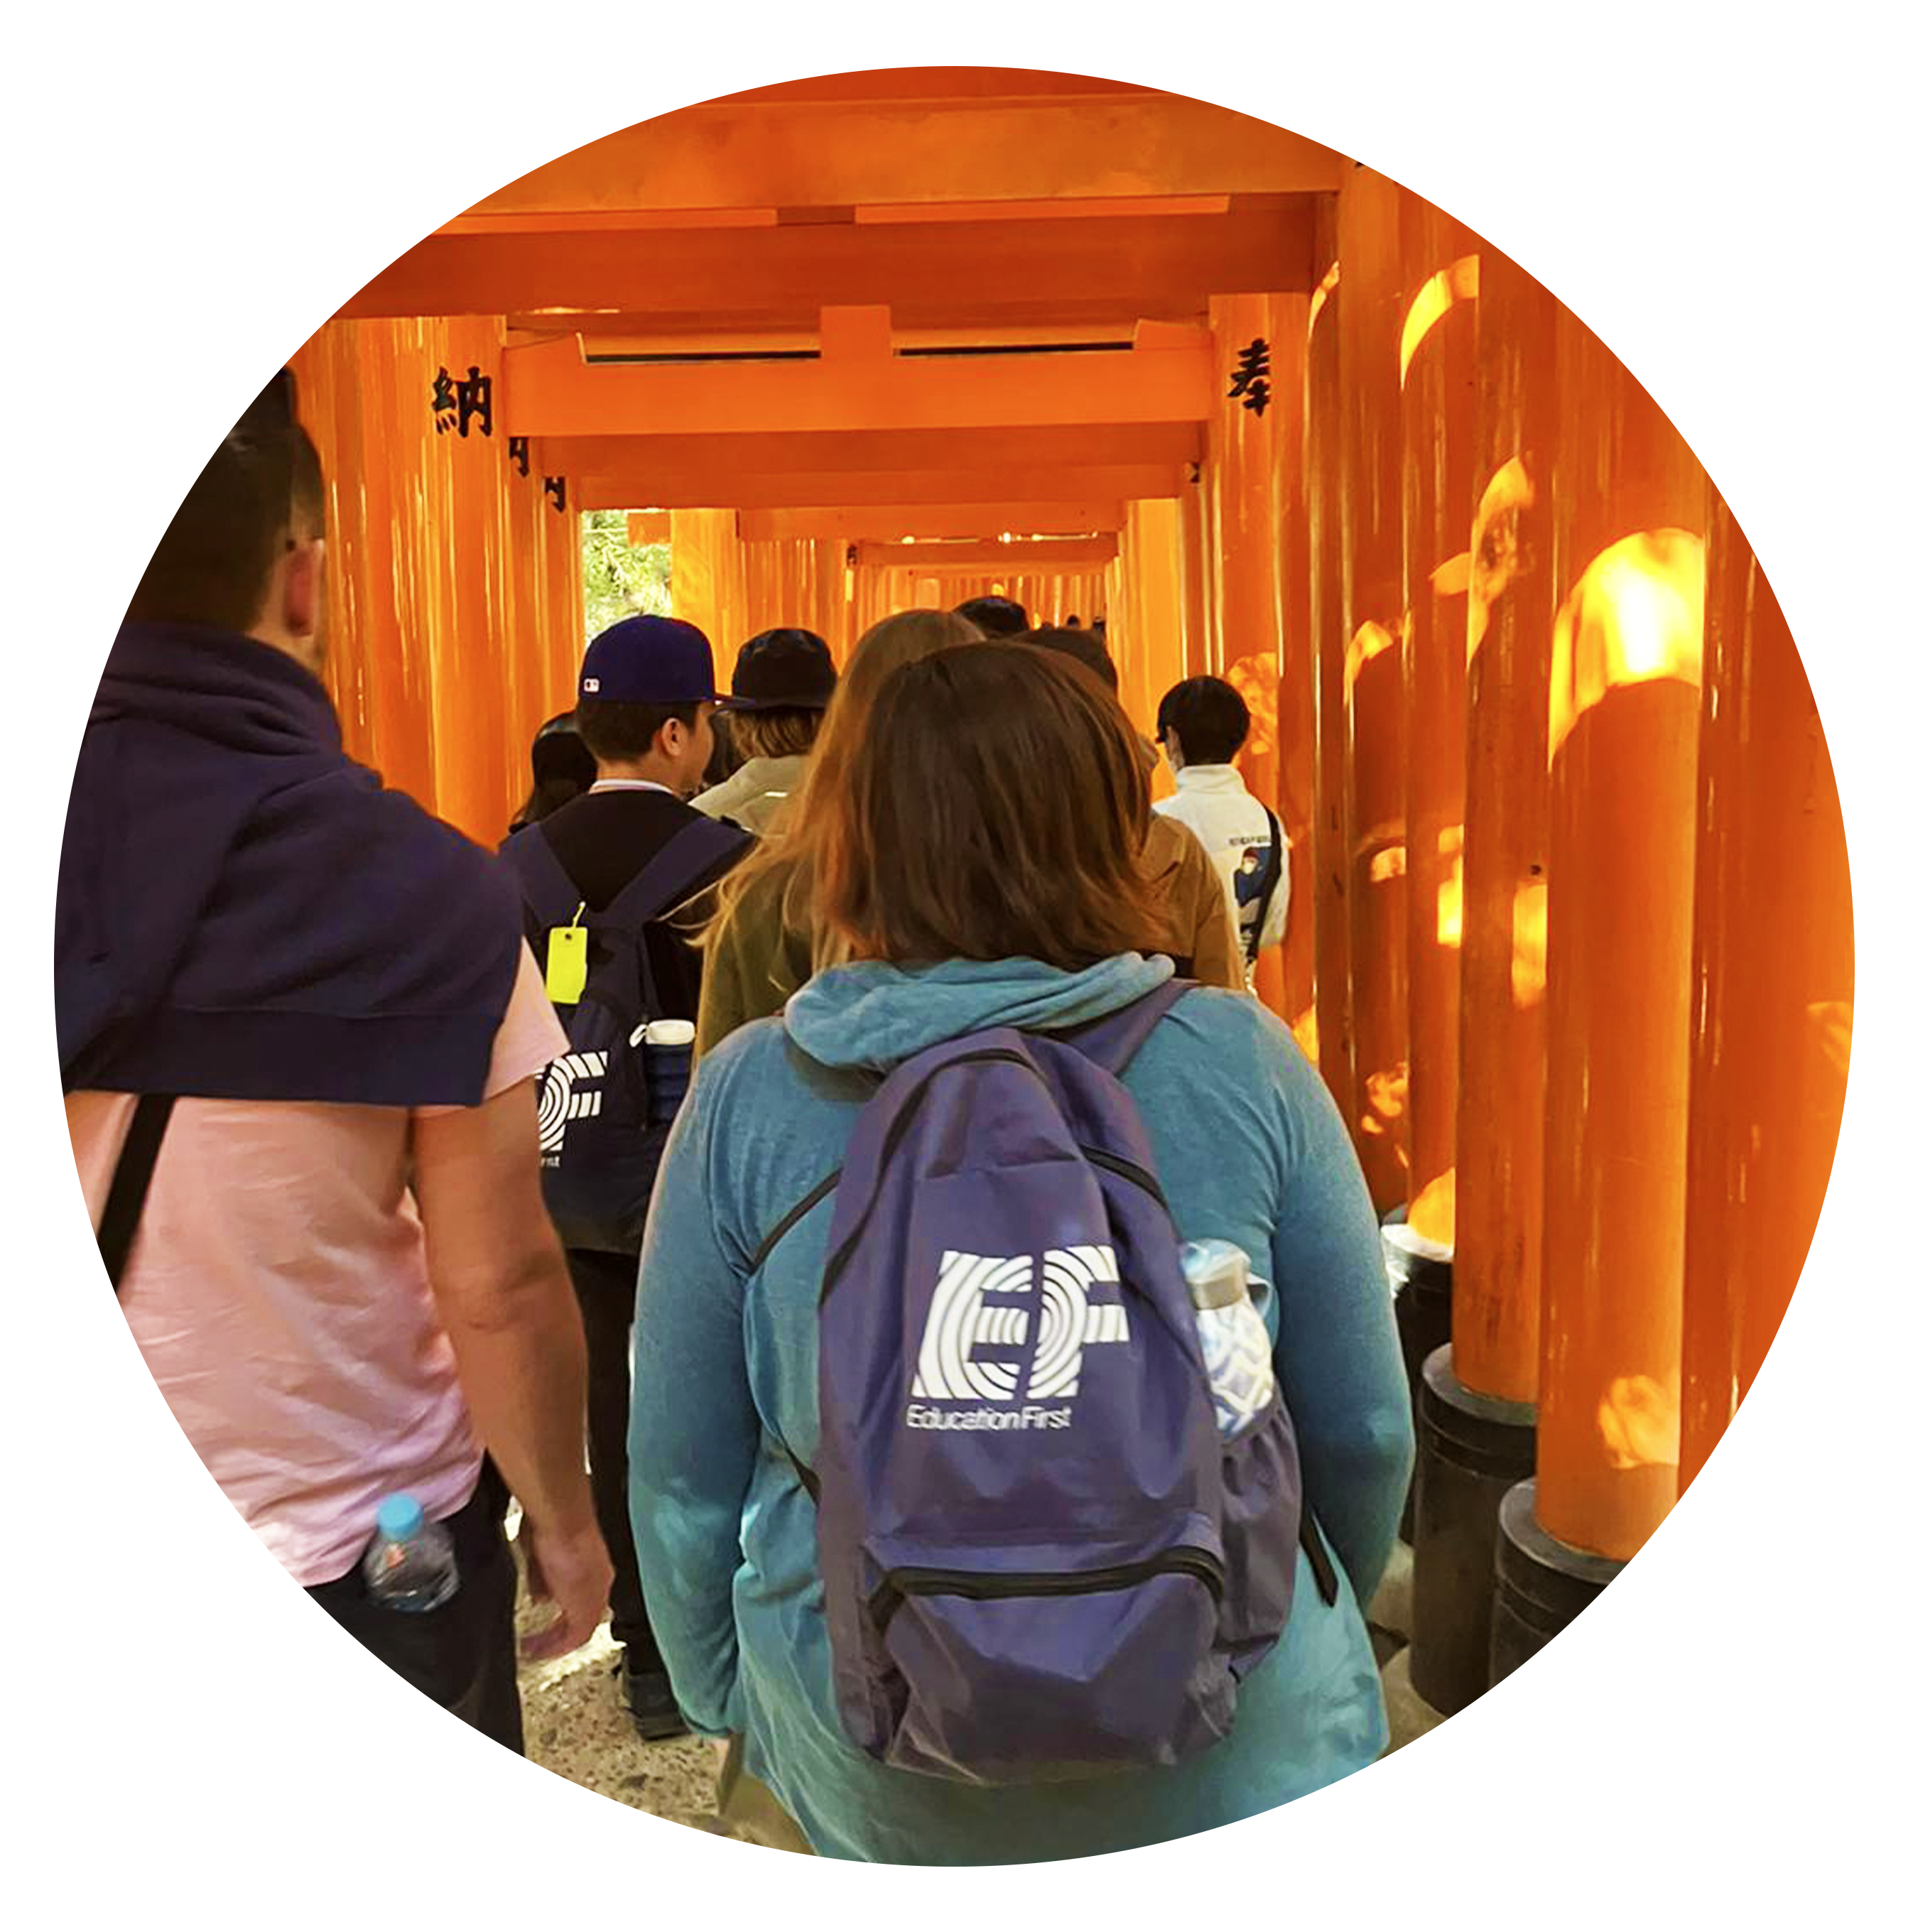 A close-up shot of EF's backpack, a sustainable travel bag, on a student at the Fushimi Inari Shrine in Japan